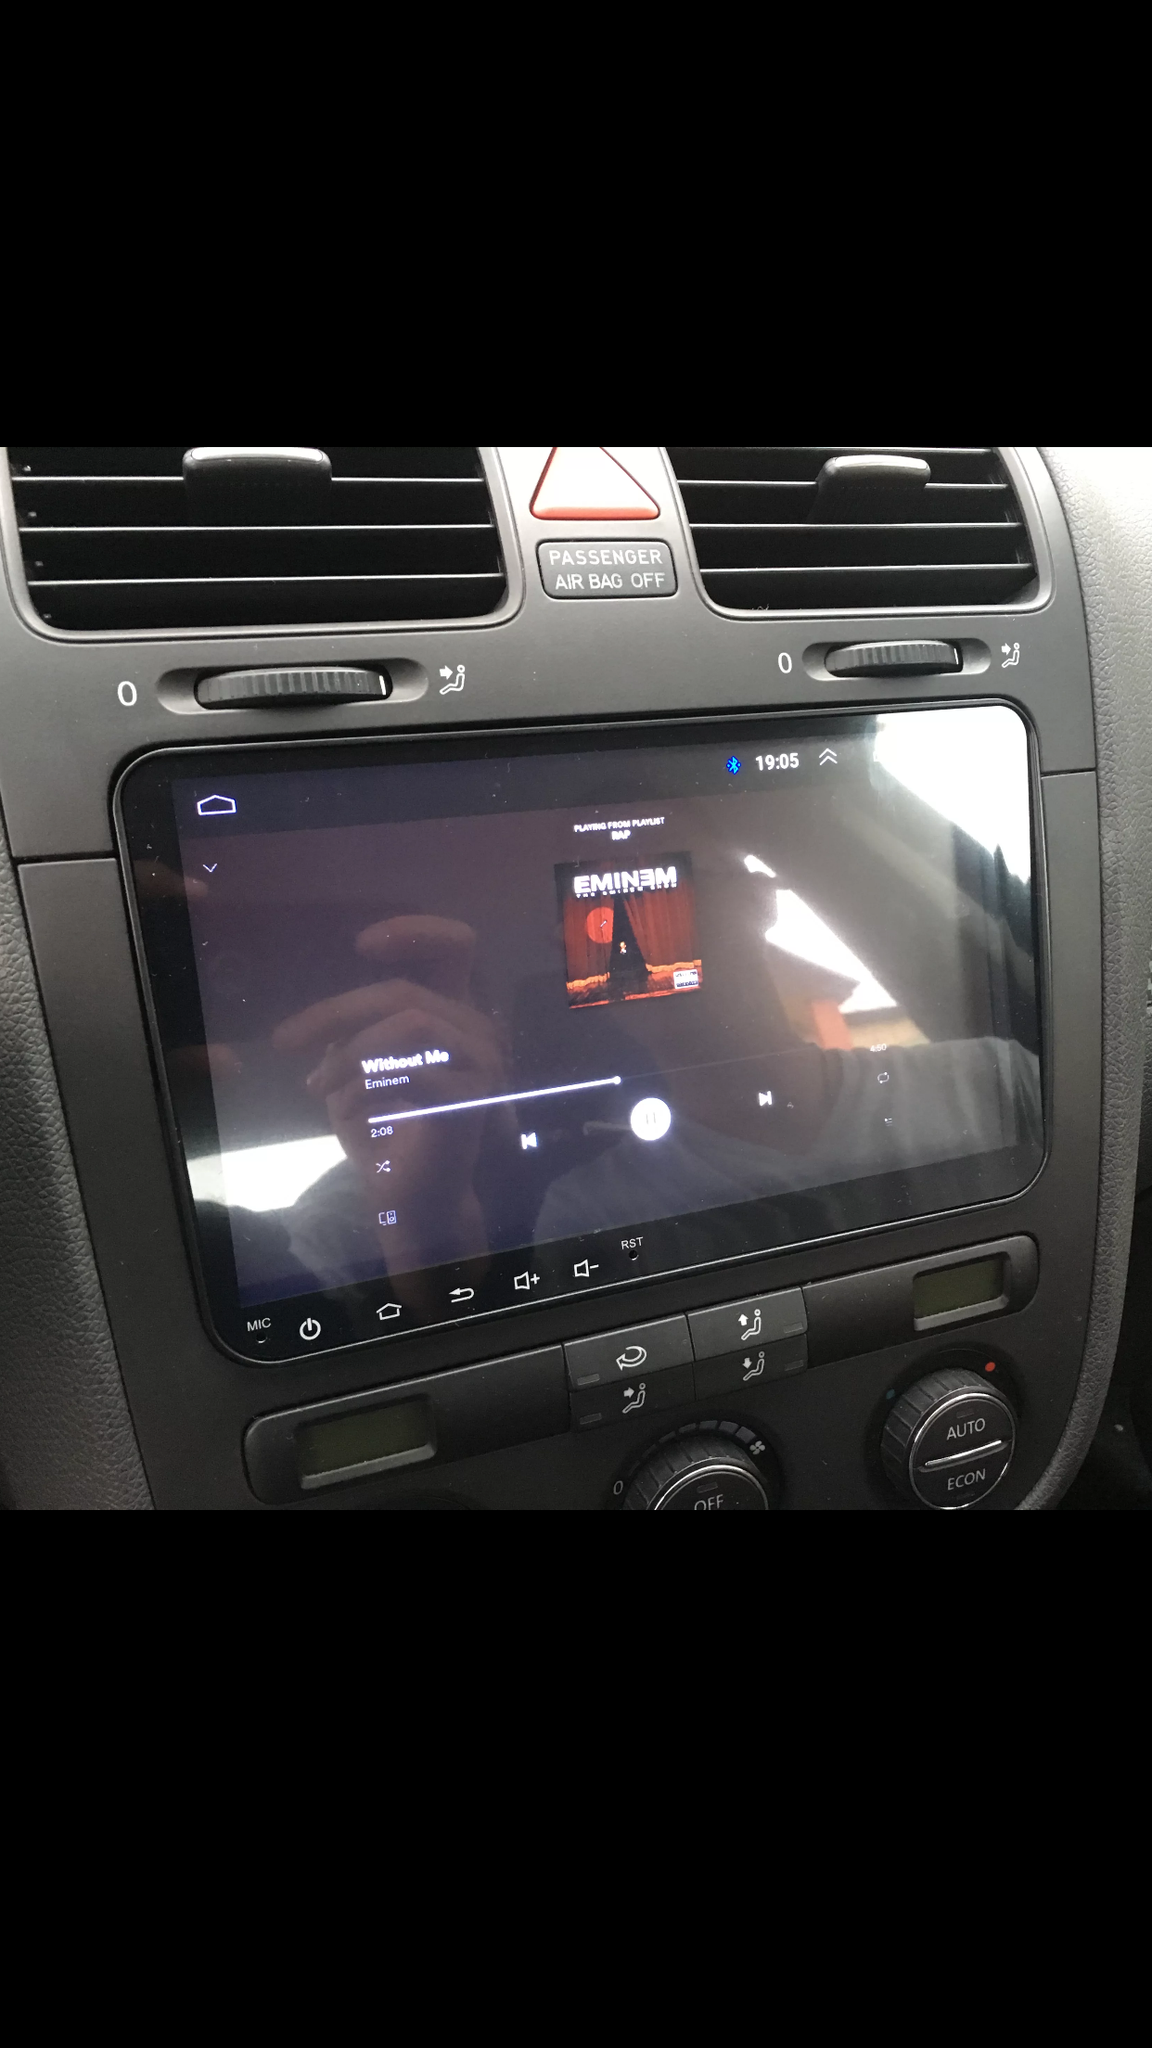 VW Android 8.1 Double DIN Head Unit + Reversing Camera for Volkswagen, Skoda Bluetooth, Radio, Video Player